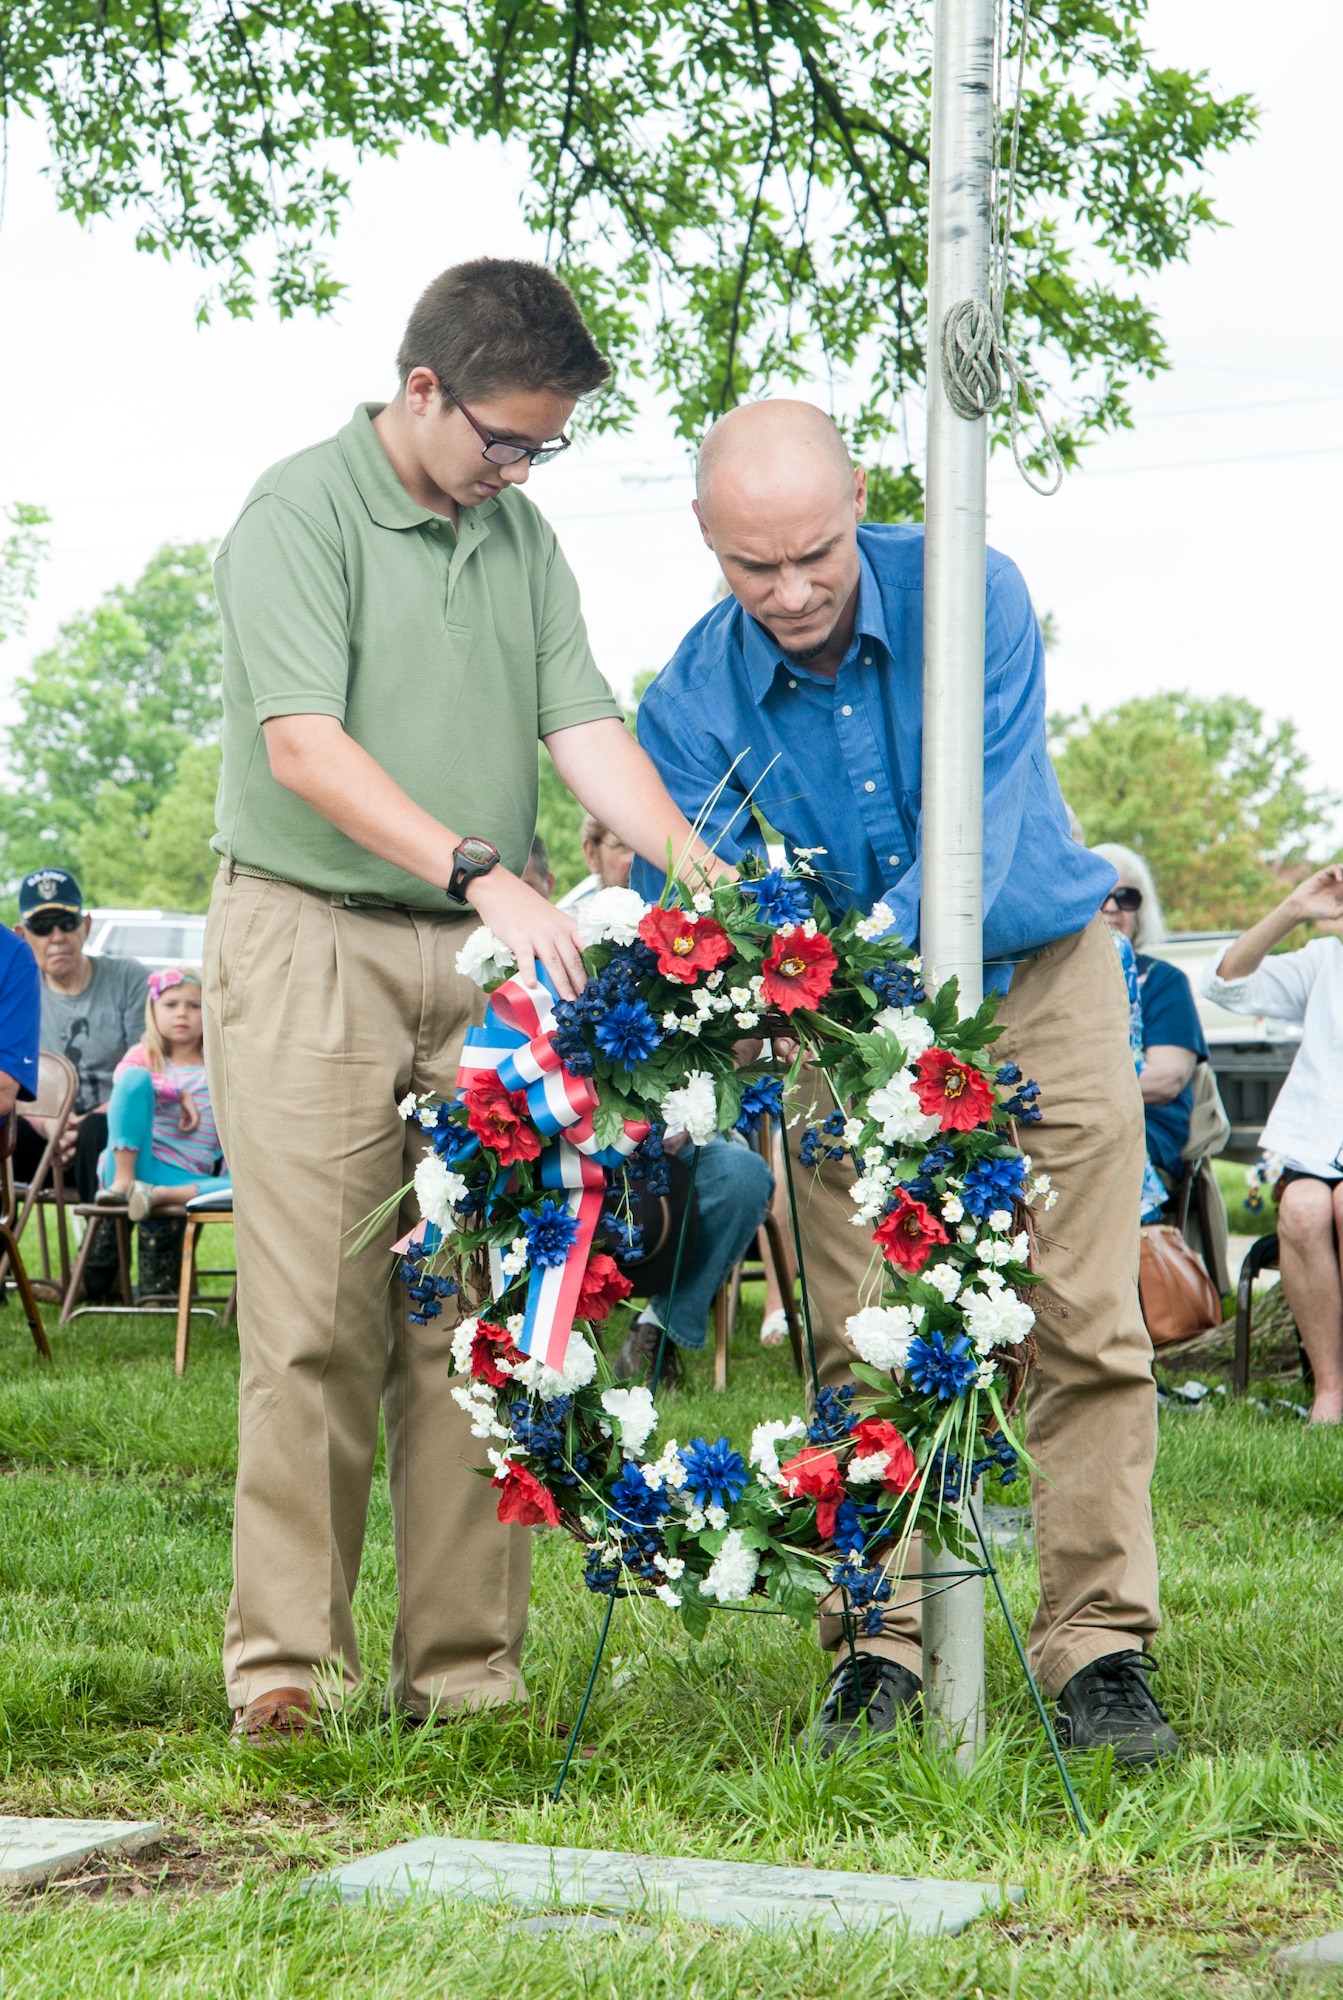 Hunter Fugit, left, and Matt Berry, descendants of 2nd Lt. George Whiteman, lay a wreath at the lieutenant’s grave during the annual ceremony May 16, 2015, in Sedalia, Mo. Whiteman, believed to be the first Airman killed during World War II, was the oldest of nine brothers and sisters. (U.S. Air Force photo by Staff Sgt. Brigitte N. Brantley/Released)